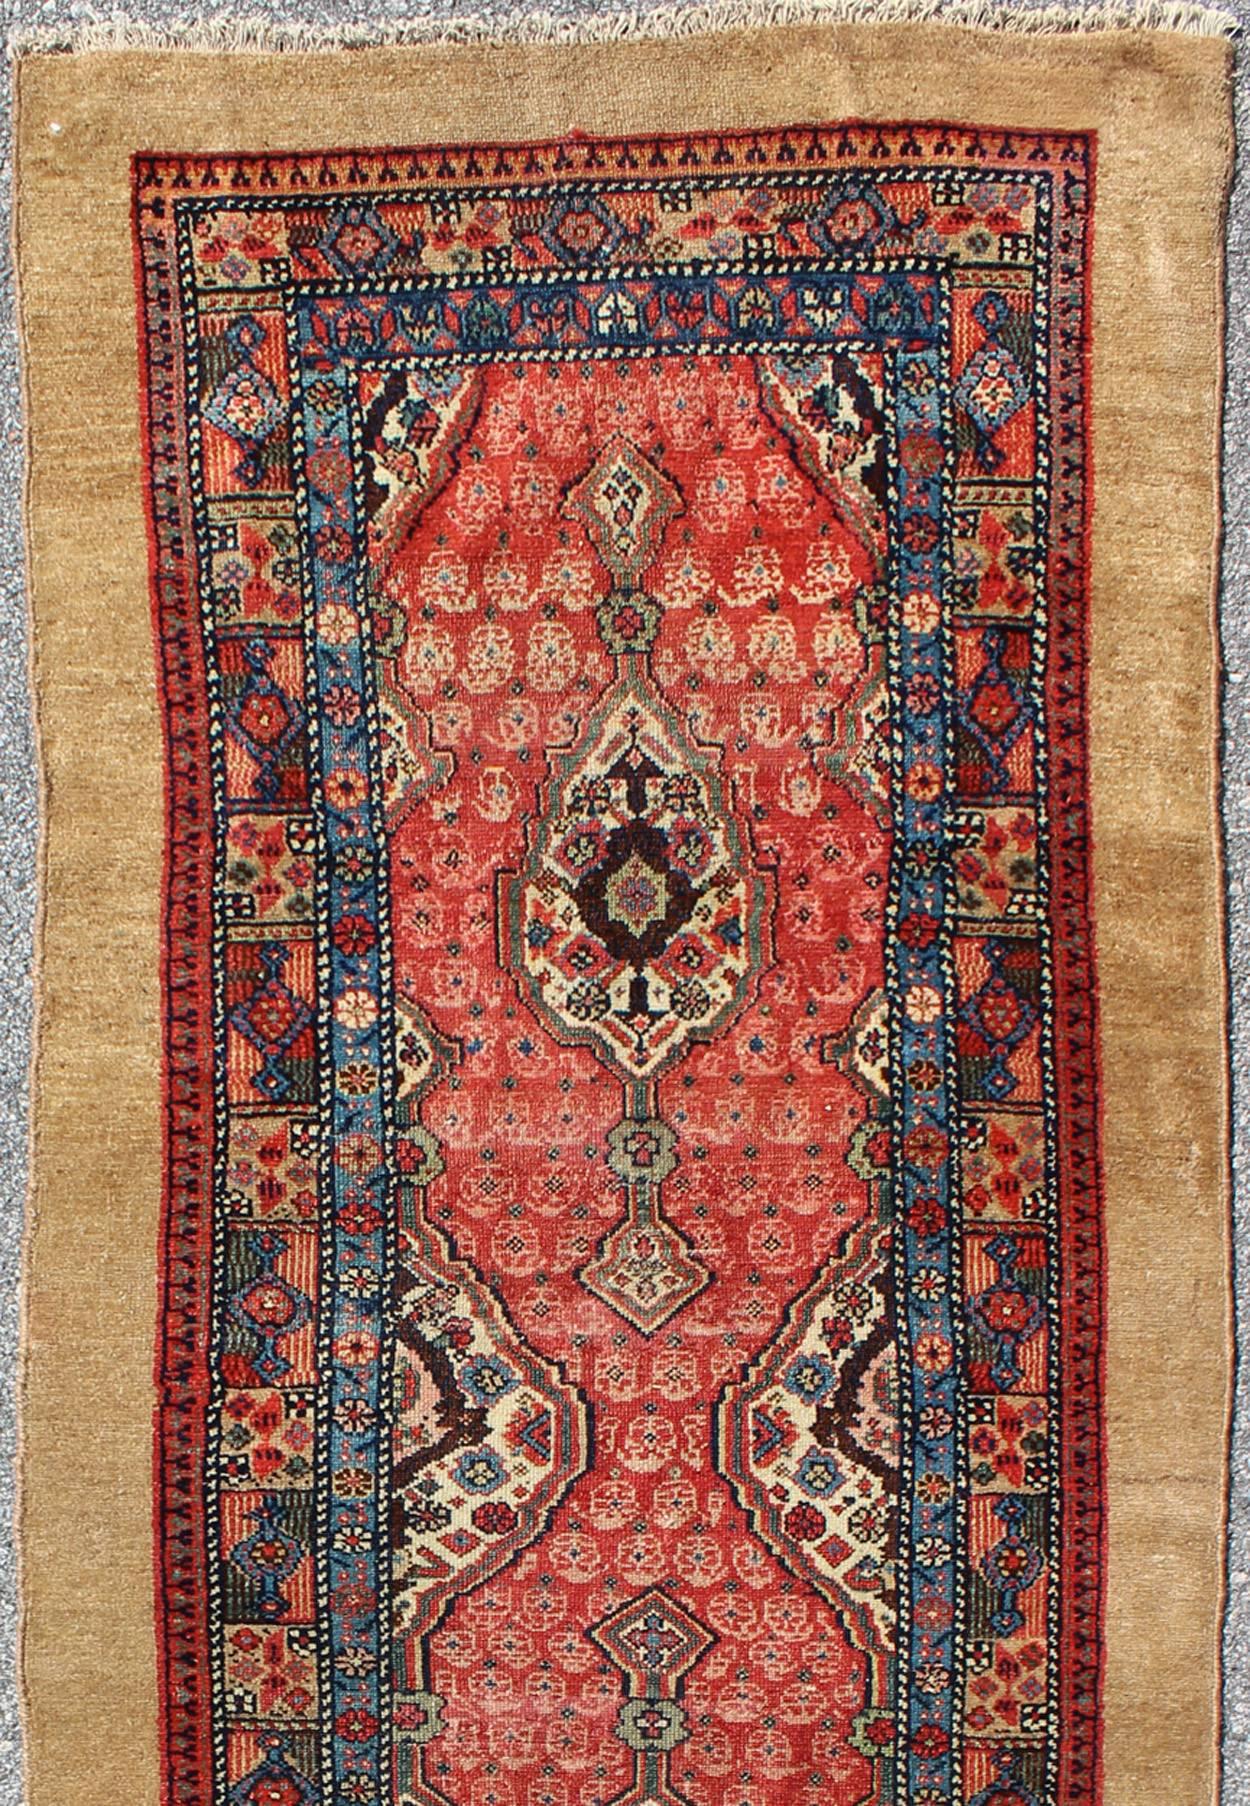 Antique Persian Serab Runner with vertical sub-geometric medallions, rug s12-0525, country of origin / type: Iran / Serab, circa 1920.

This rare Antique Serab runner from the early 20th century features beautiful vertically-arranged medallions